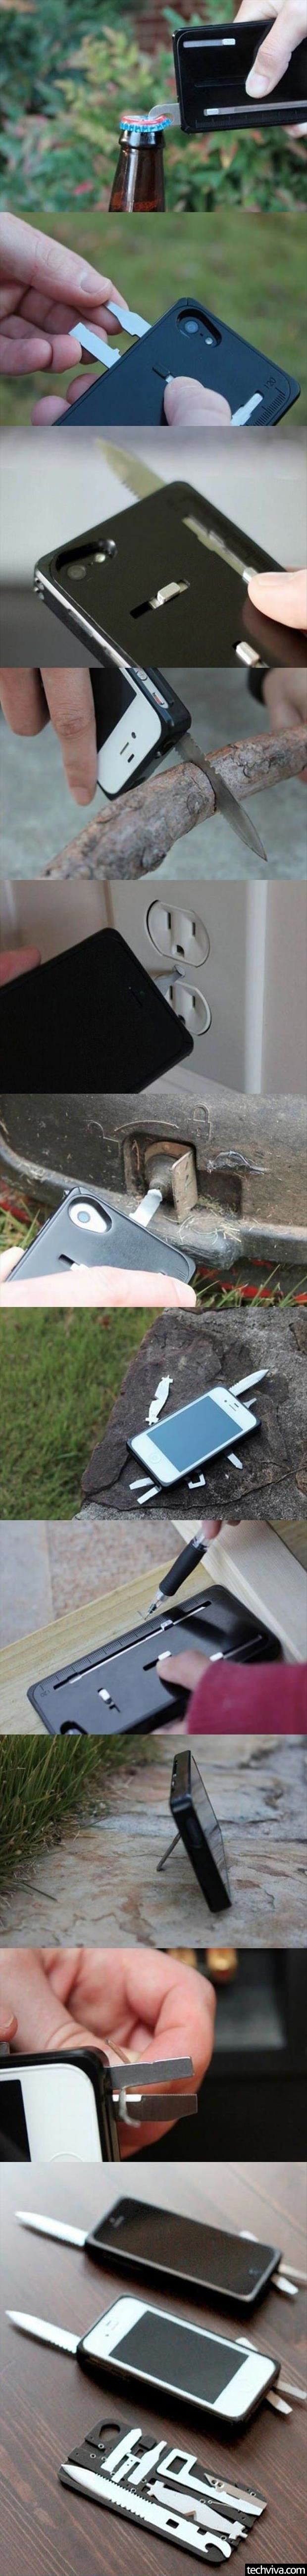 cell-phone-cover-tool-set